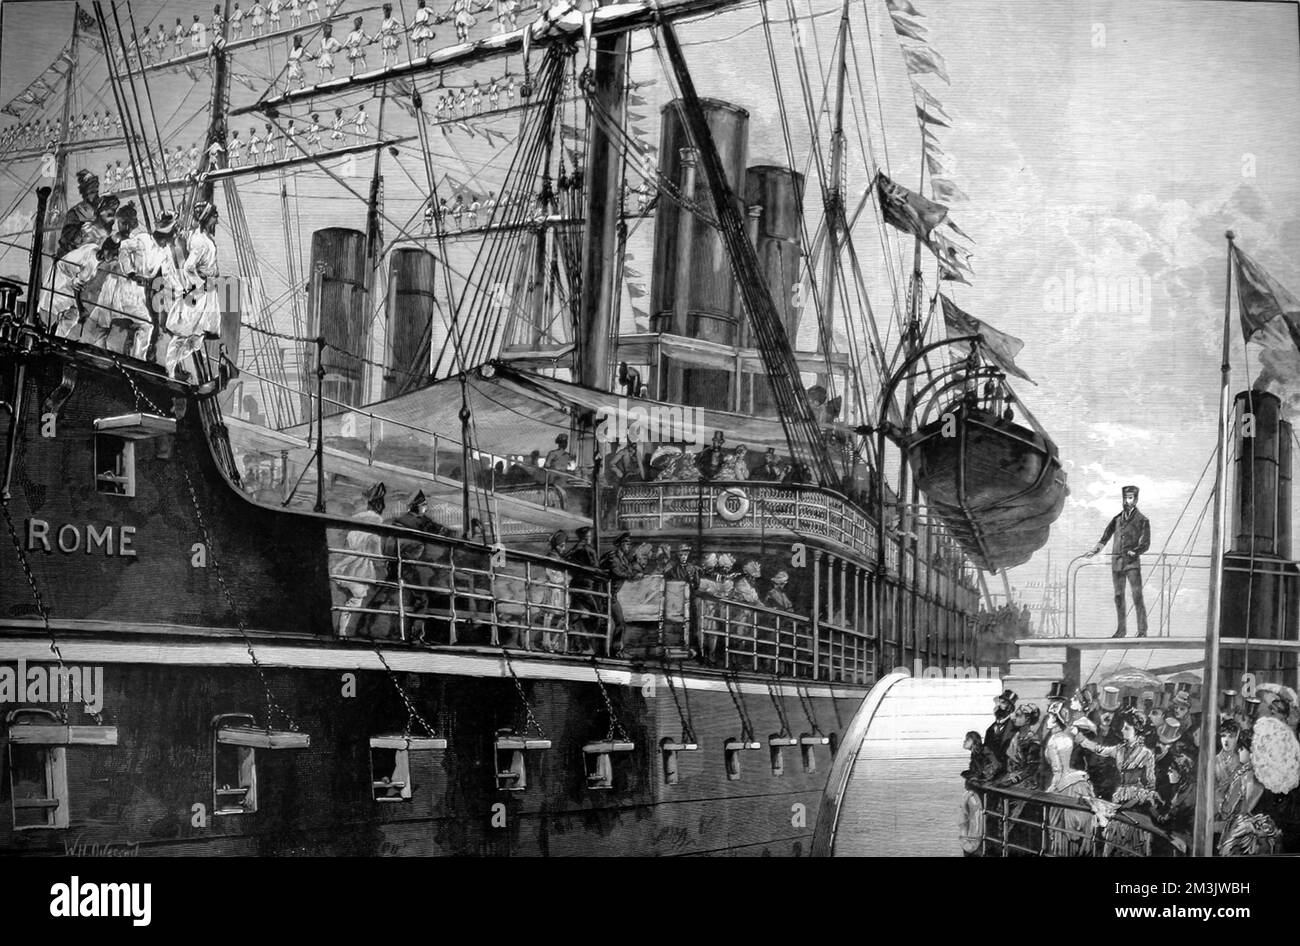 The P.&O. steamship 'Rome' lying in the Royal Albert Docks, with its lascar crew manning the yards, 1886. The crews of the SS 'Chusan' and 'Paramatta' were also manning their yards (in the background), in honour of the arrival of the 'Rome' with a large number of Colonial and Indian visitors on board her. At right can be seen the deck and funnel of a small paddle-steamer, come to meet the 'Rome' and its passengers. Stock Photo